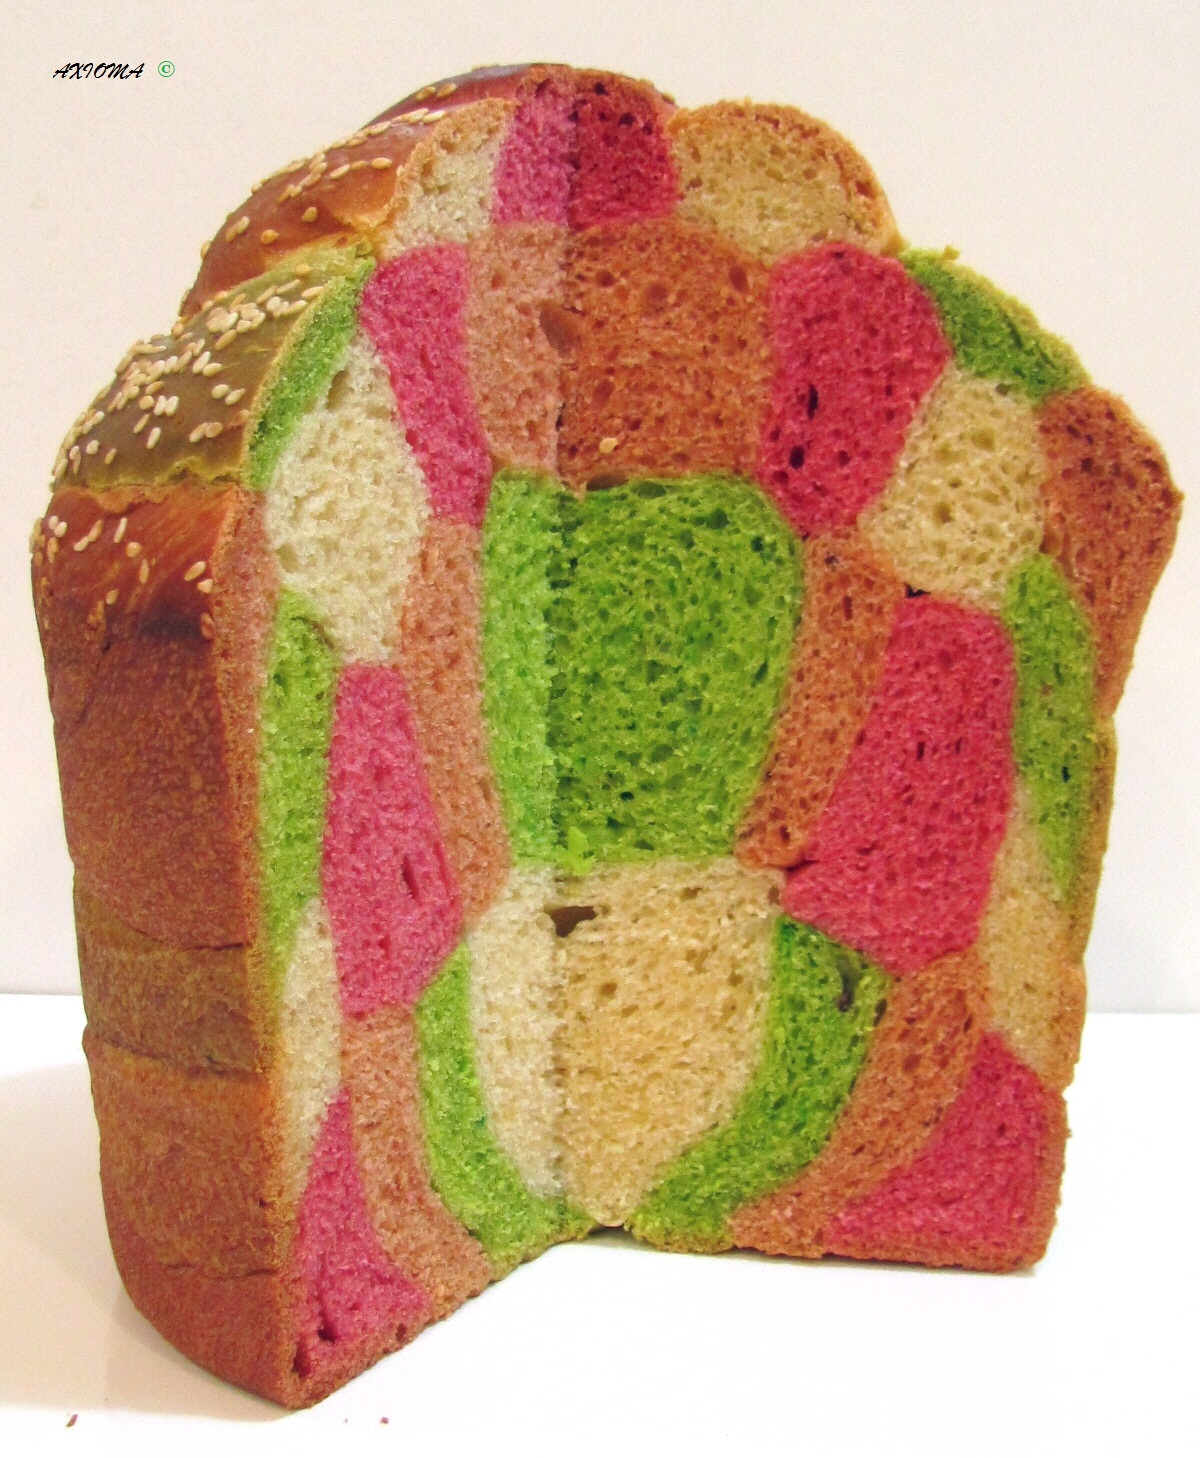 Bread Mosaic (oven)